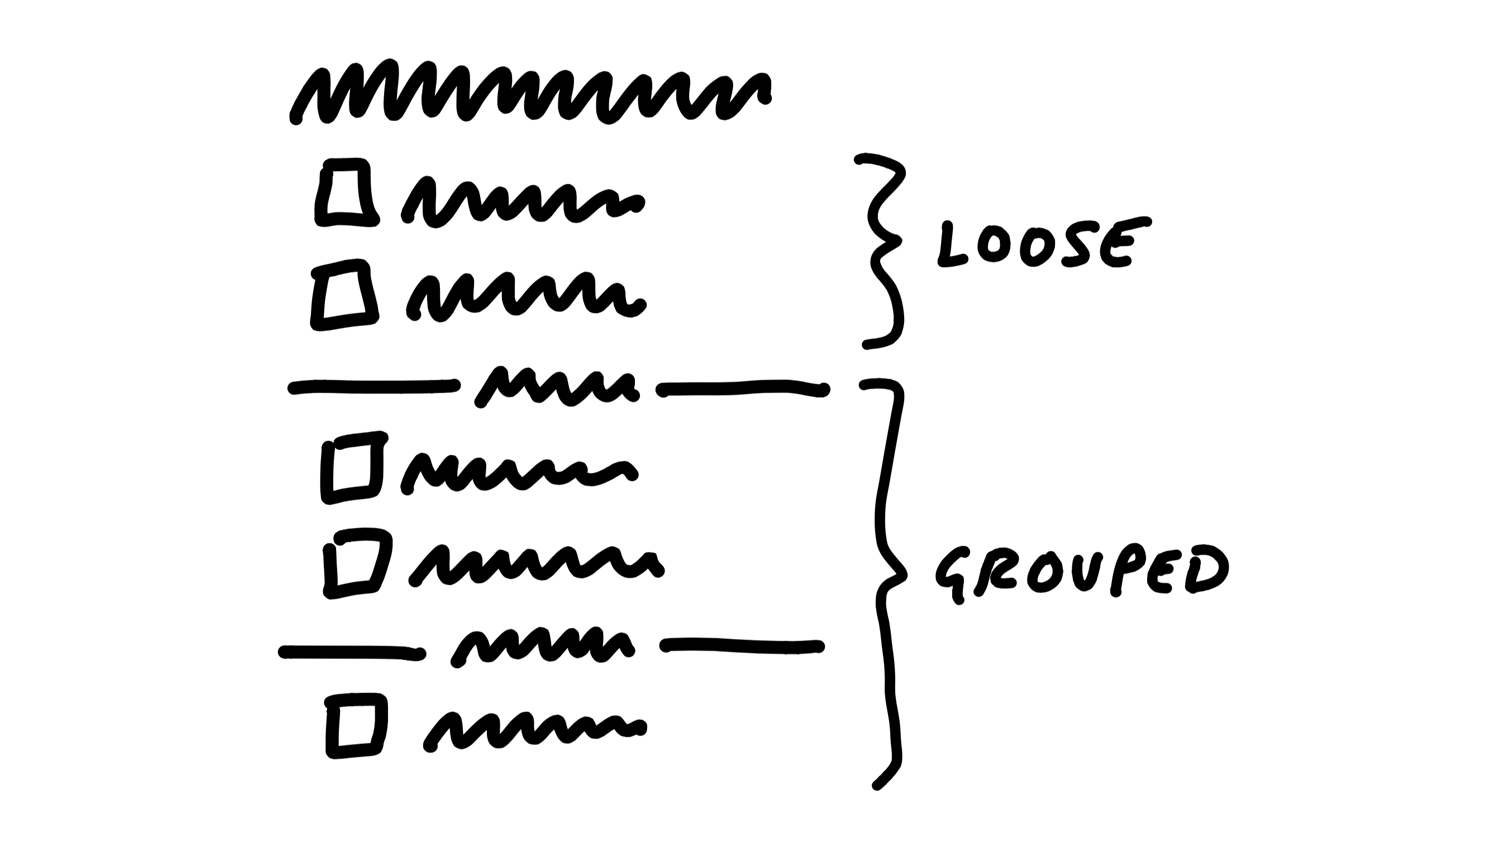 The fat marker sketch of the to-do group concept from the previous chapter, with loose to-dos at the top of the list and grouped to-dos at the bottom.